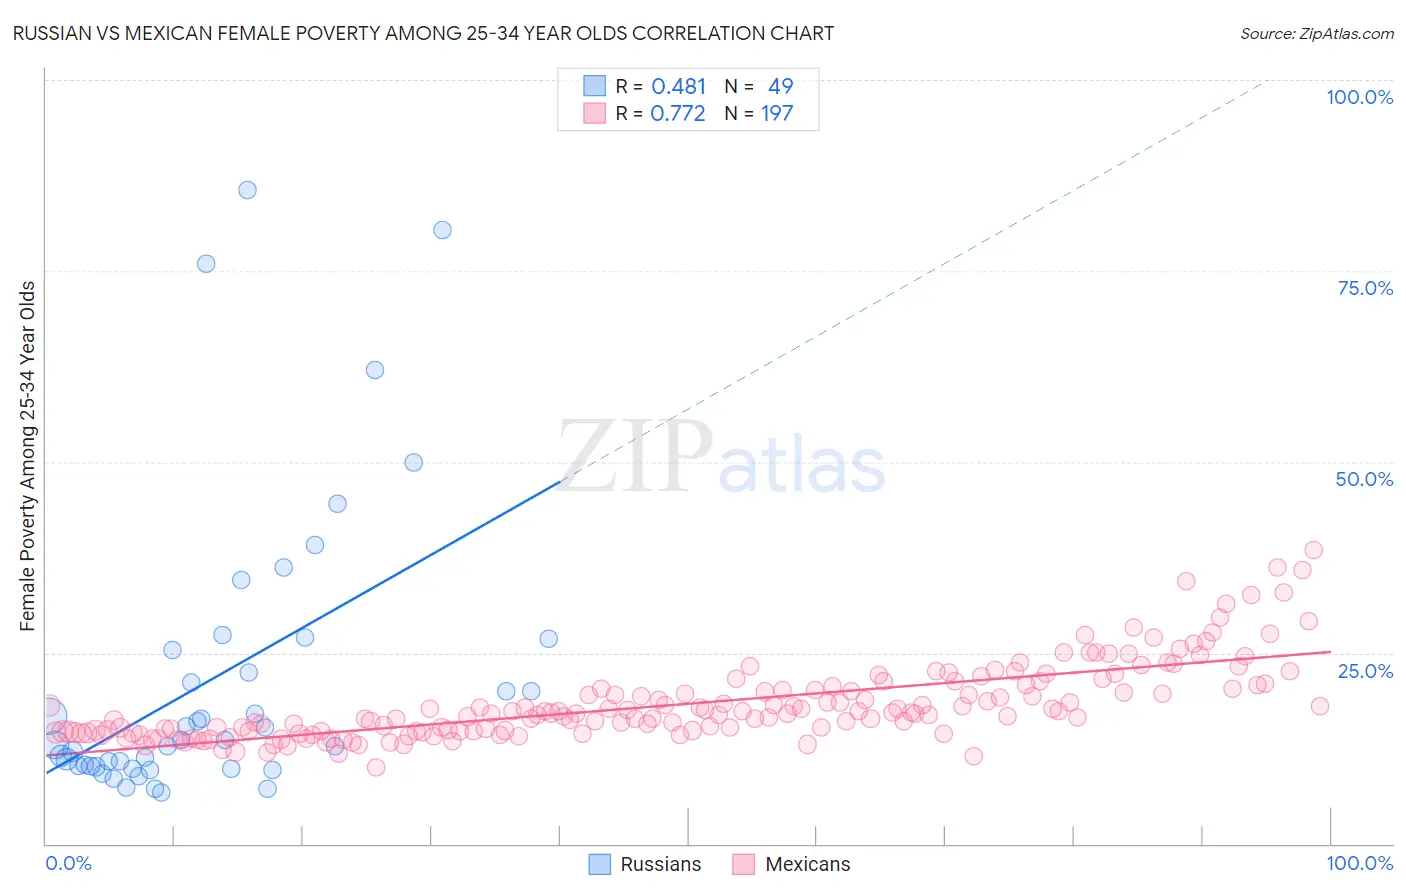 Russian vs Mexican Female Poverty Among 25-34 Year Olds